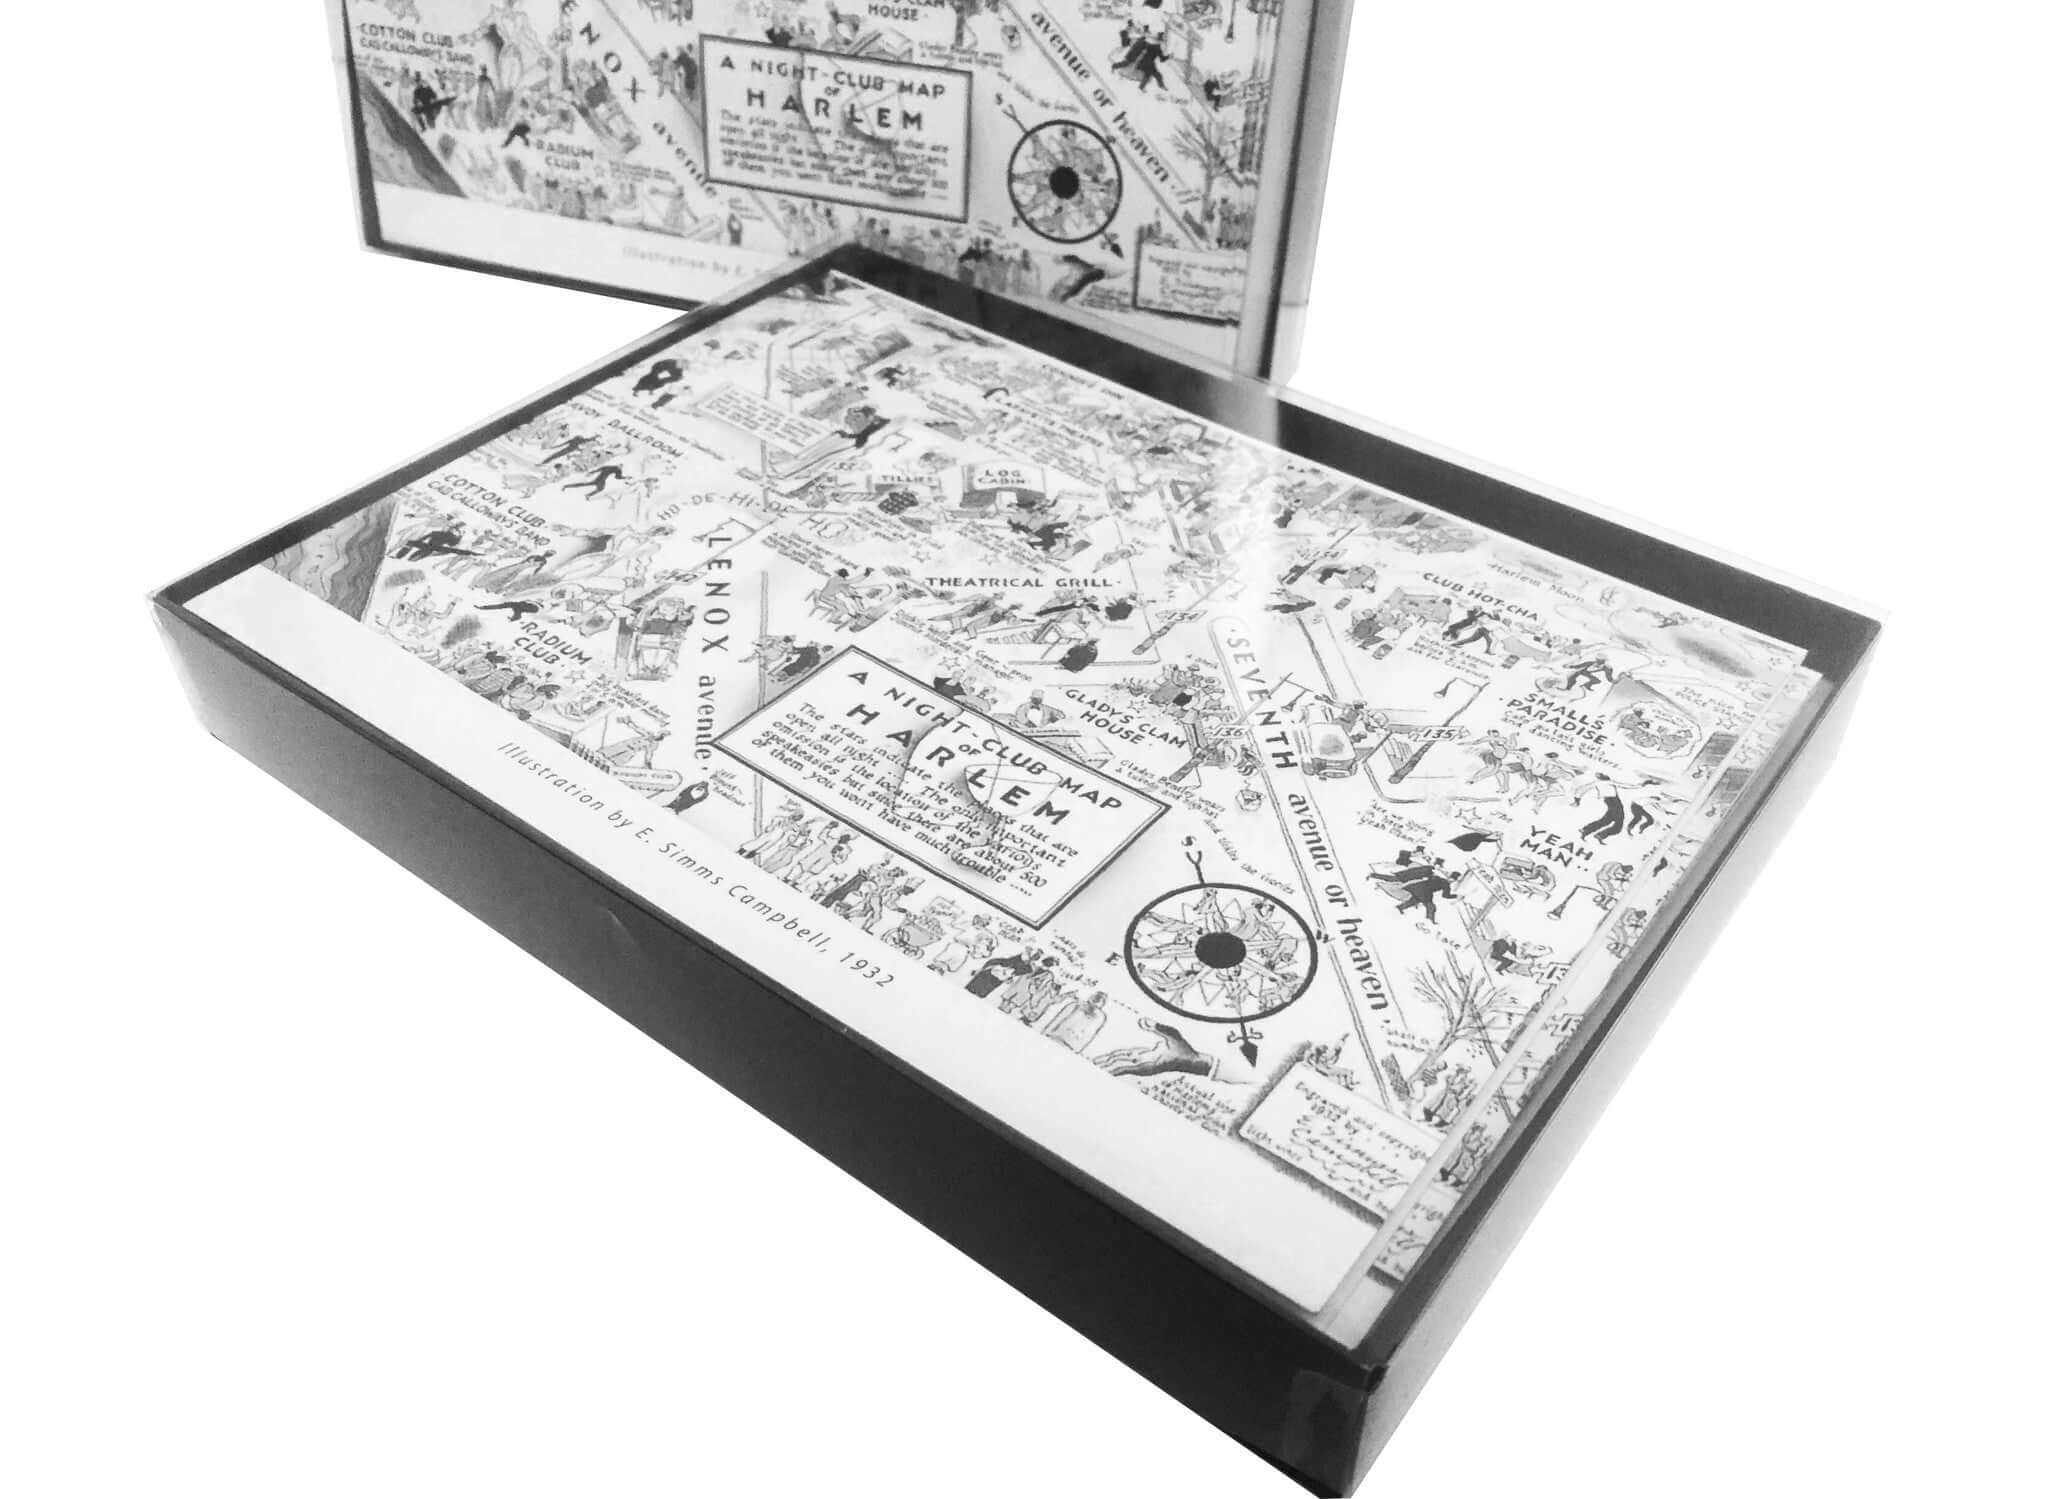 A box of our Night Club Map of Harlem Greeting cards in a black box with 10 cards inside.